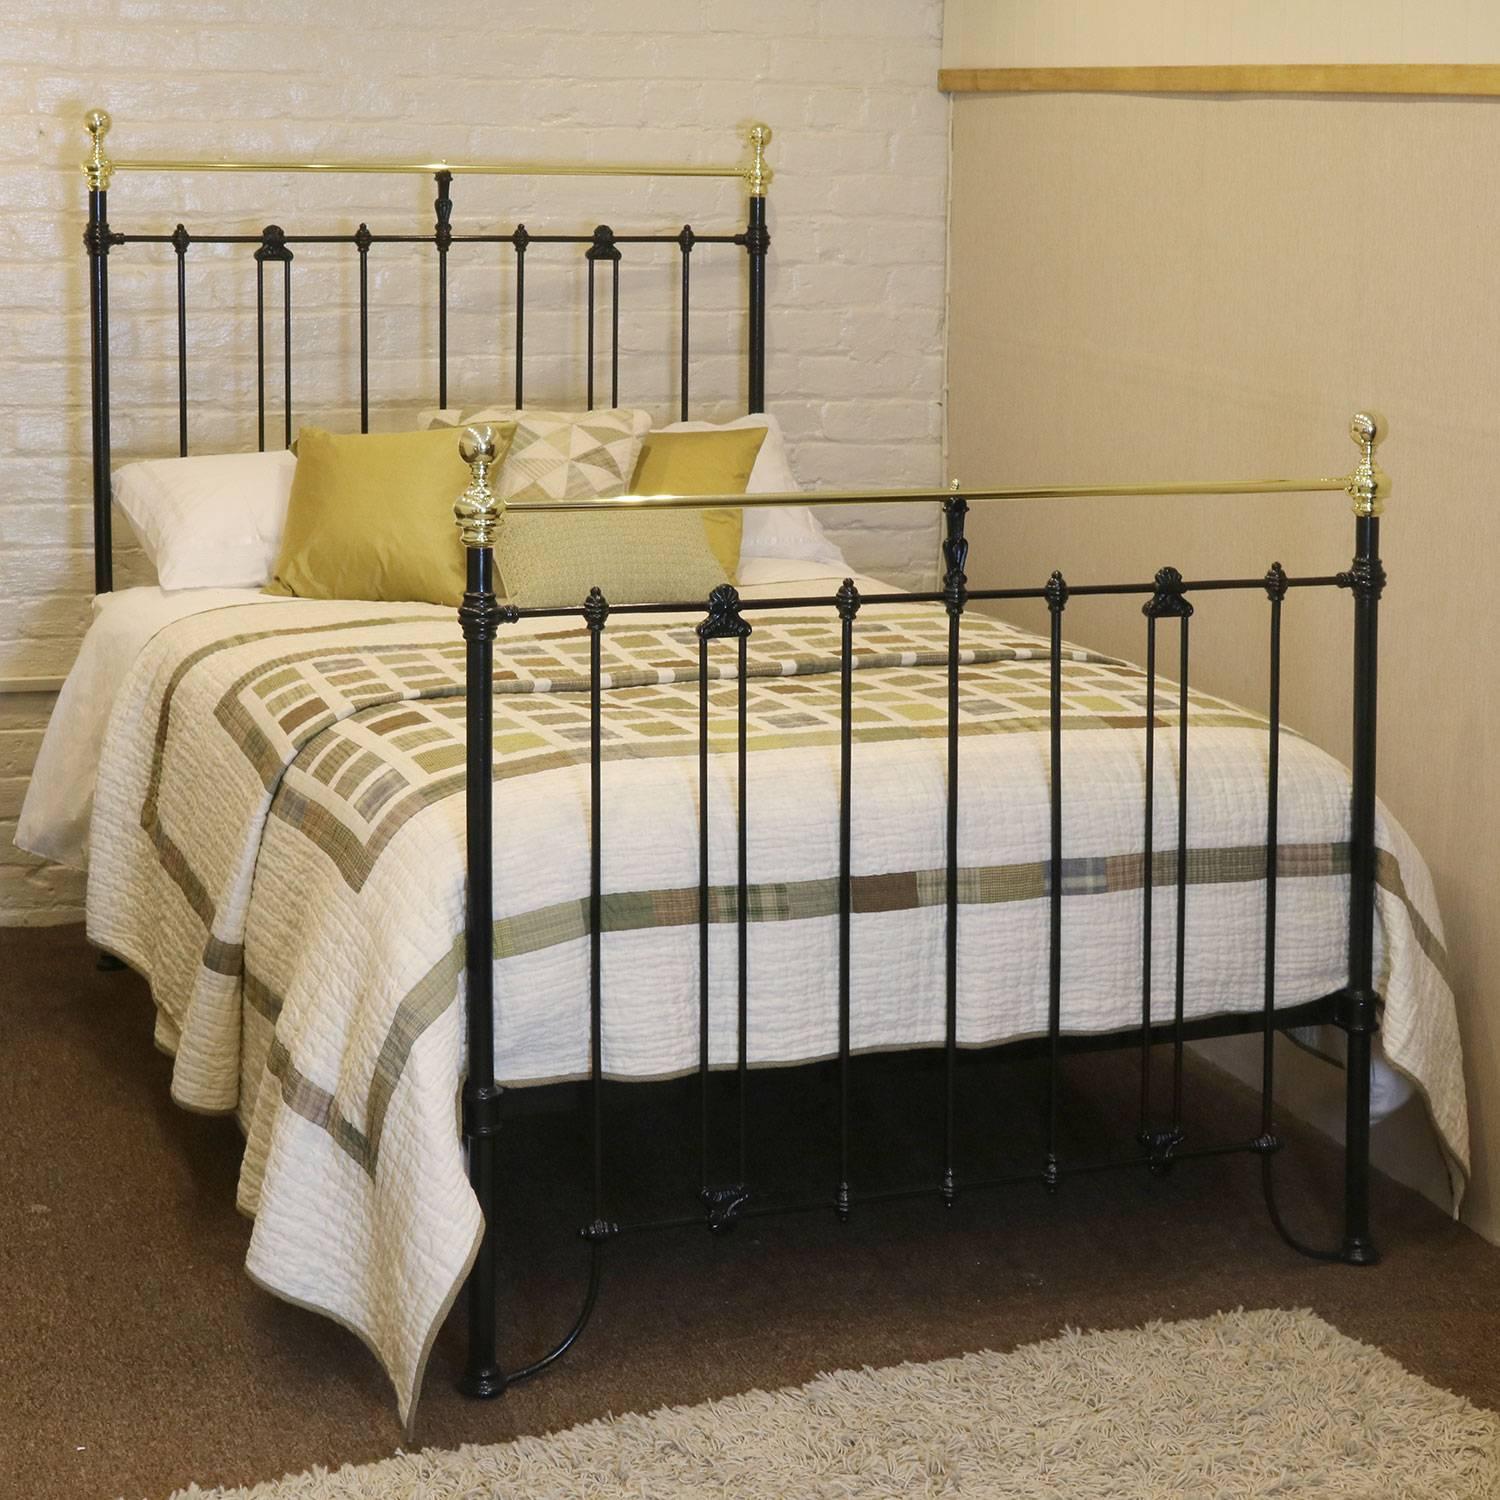 A classical style brass and iron bedstead with straight brass top rail and decorative castings.

This bed accepts a double size (54 inches, 4ft 6in wide) base and mattress set.

The price is for the bed frame alone. The base, mattress, bedding